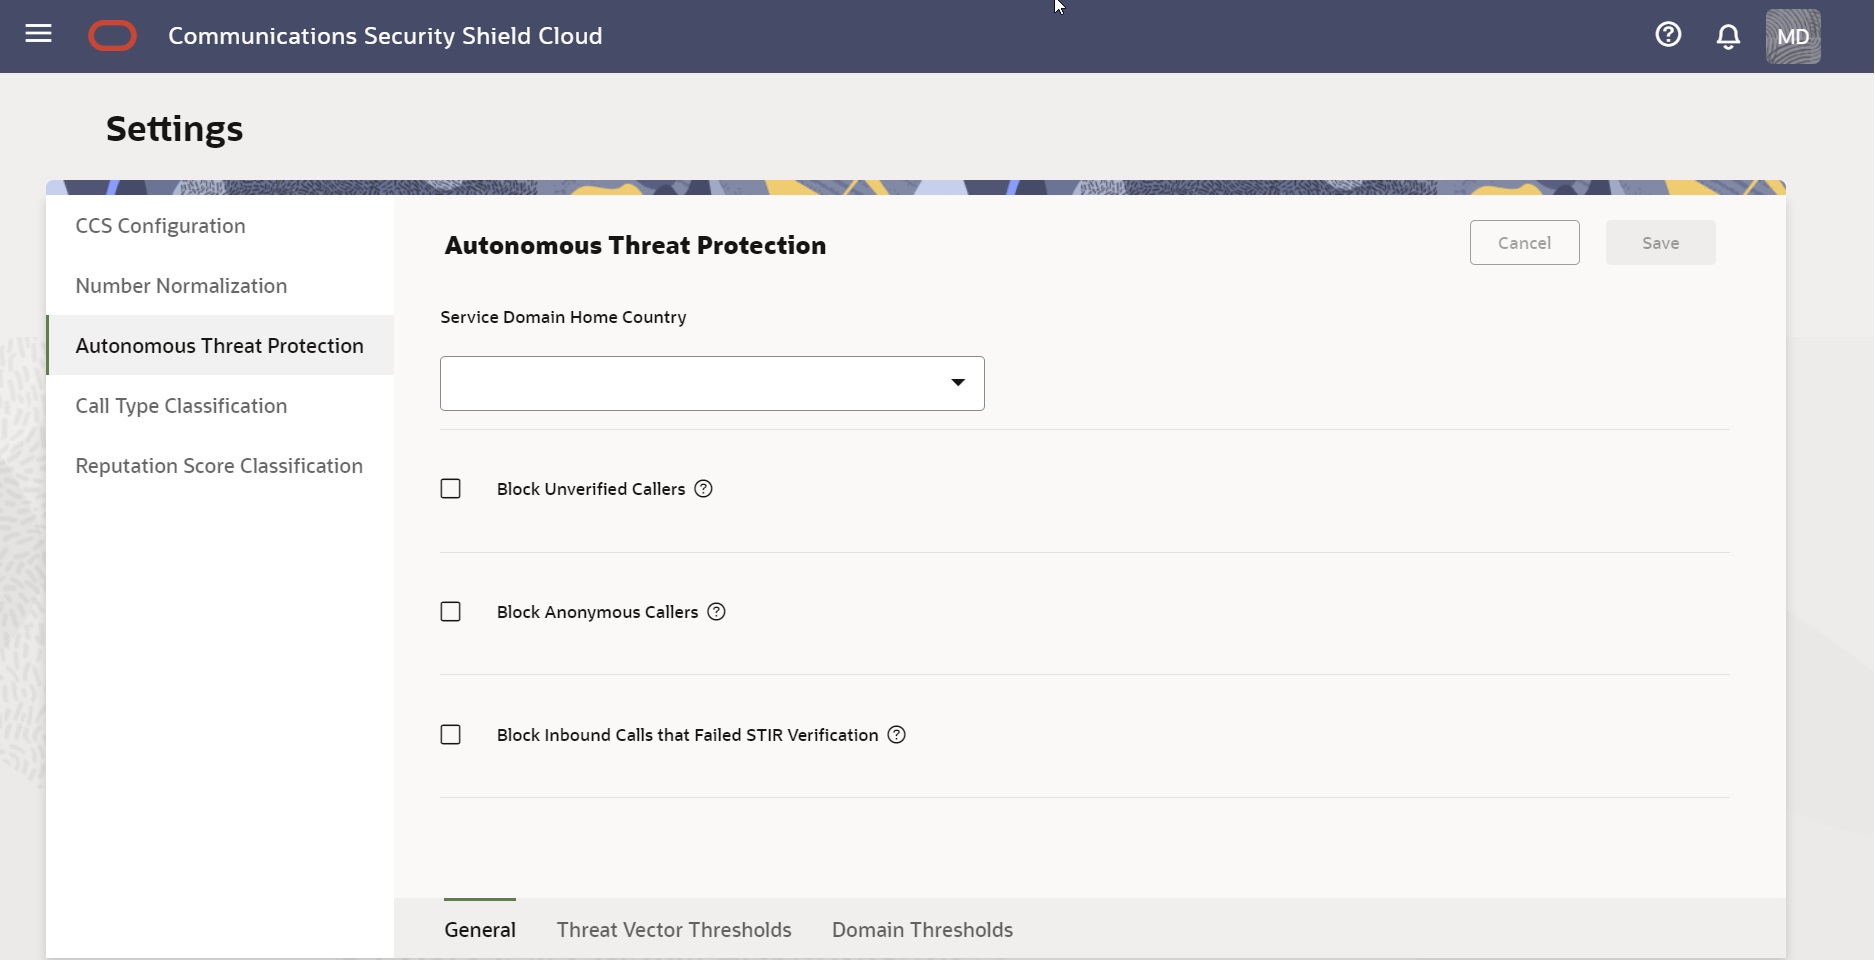 This screen capture shows the Setting page with the tabs for thresholds for General, Threat Vector Thresholds, and Domain Thresholds settings.